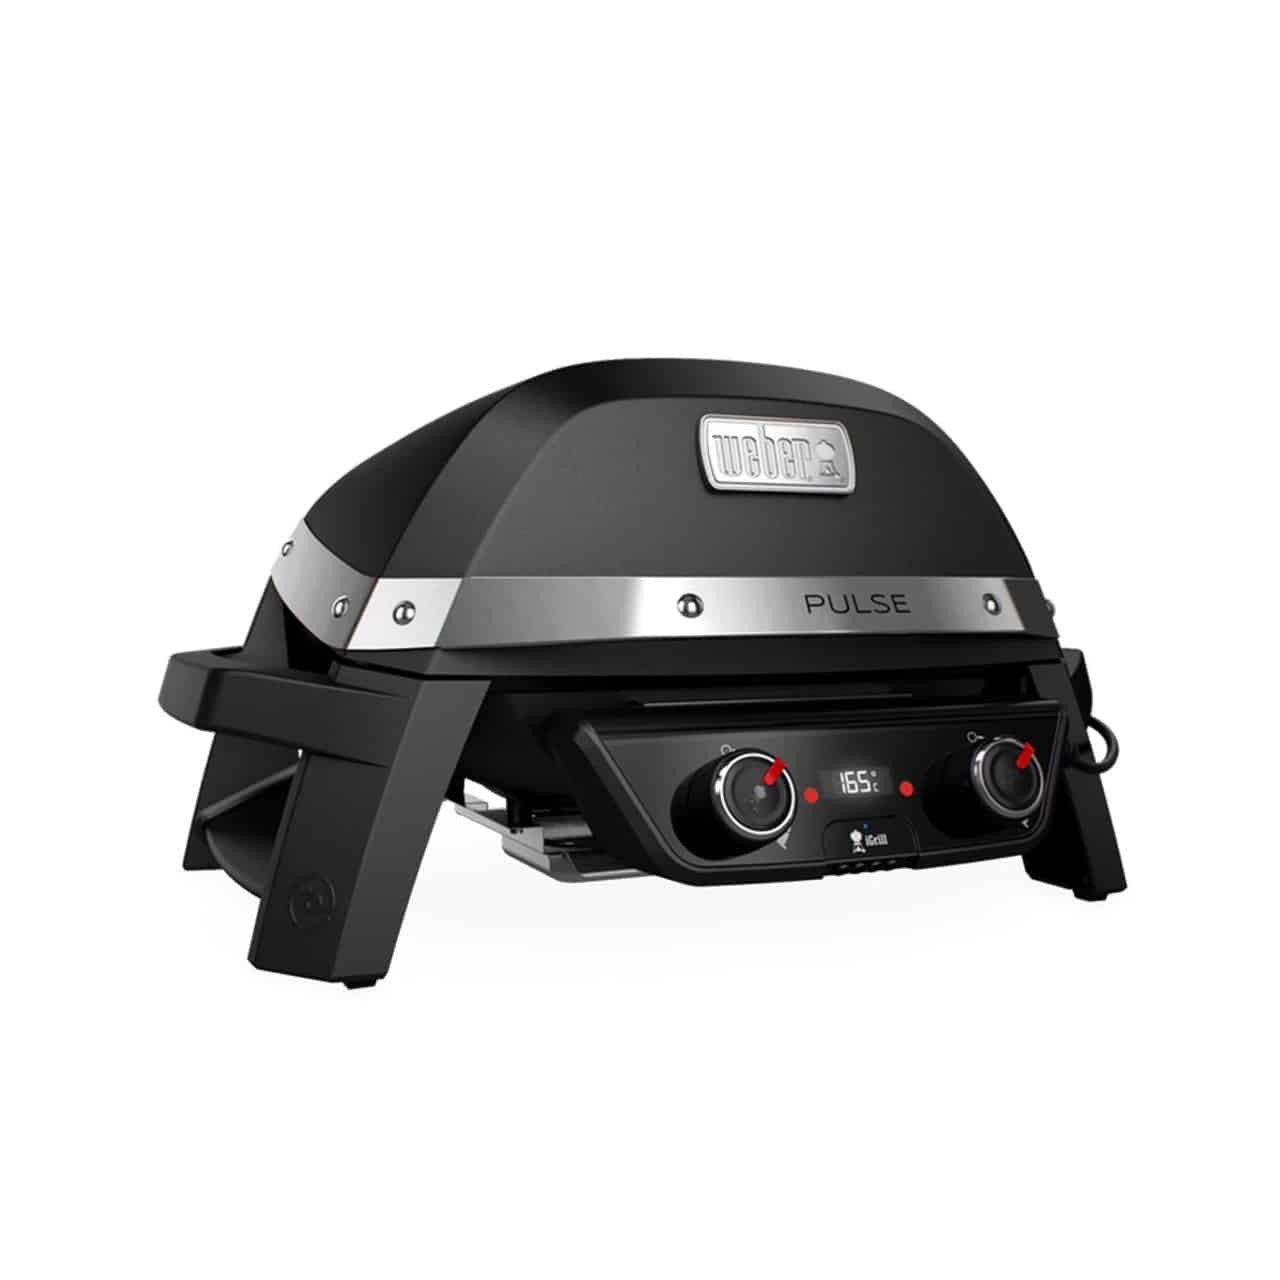 Weber® Pulse 2000 Electric Grill Cosmetic Mark -2010